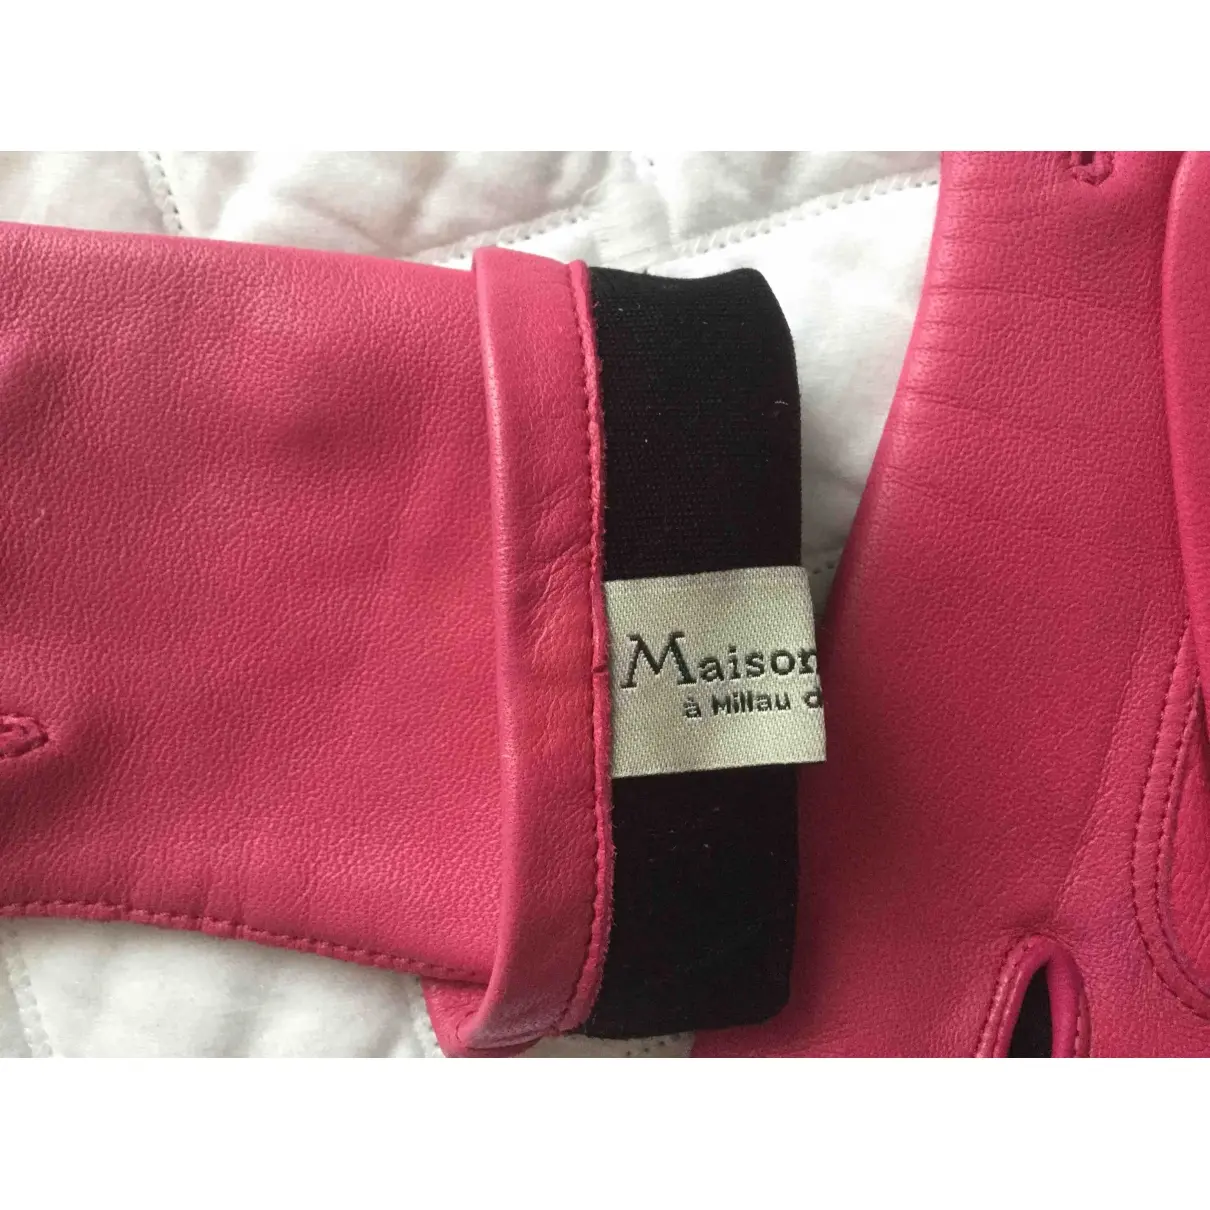 Maison Fabre Leather gloves for sale